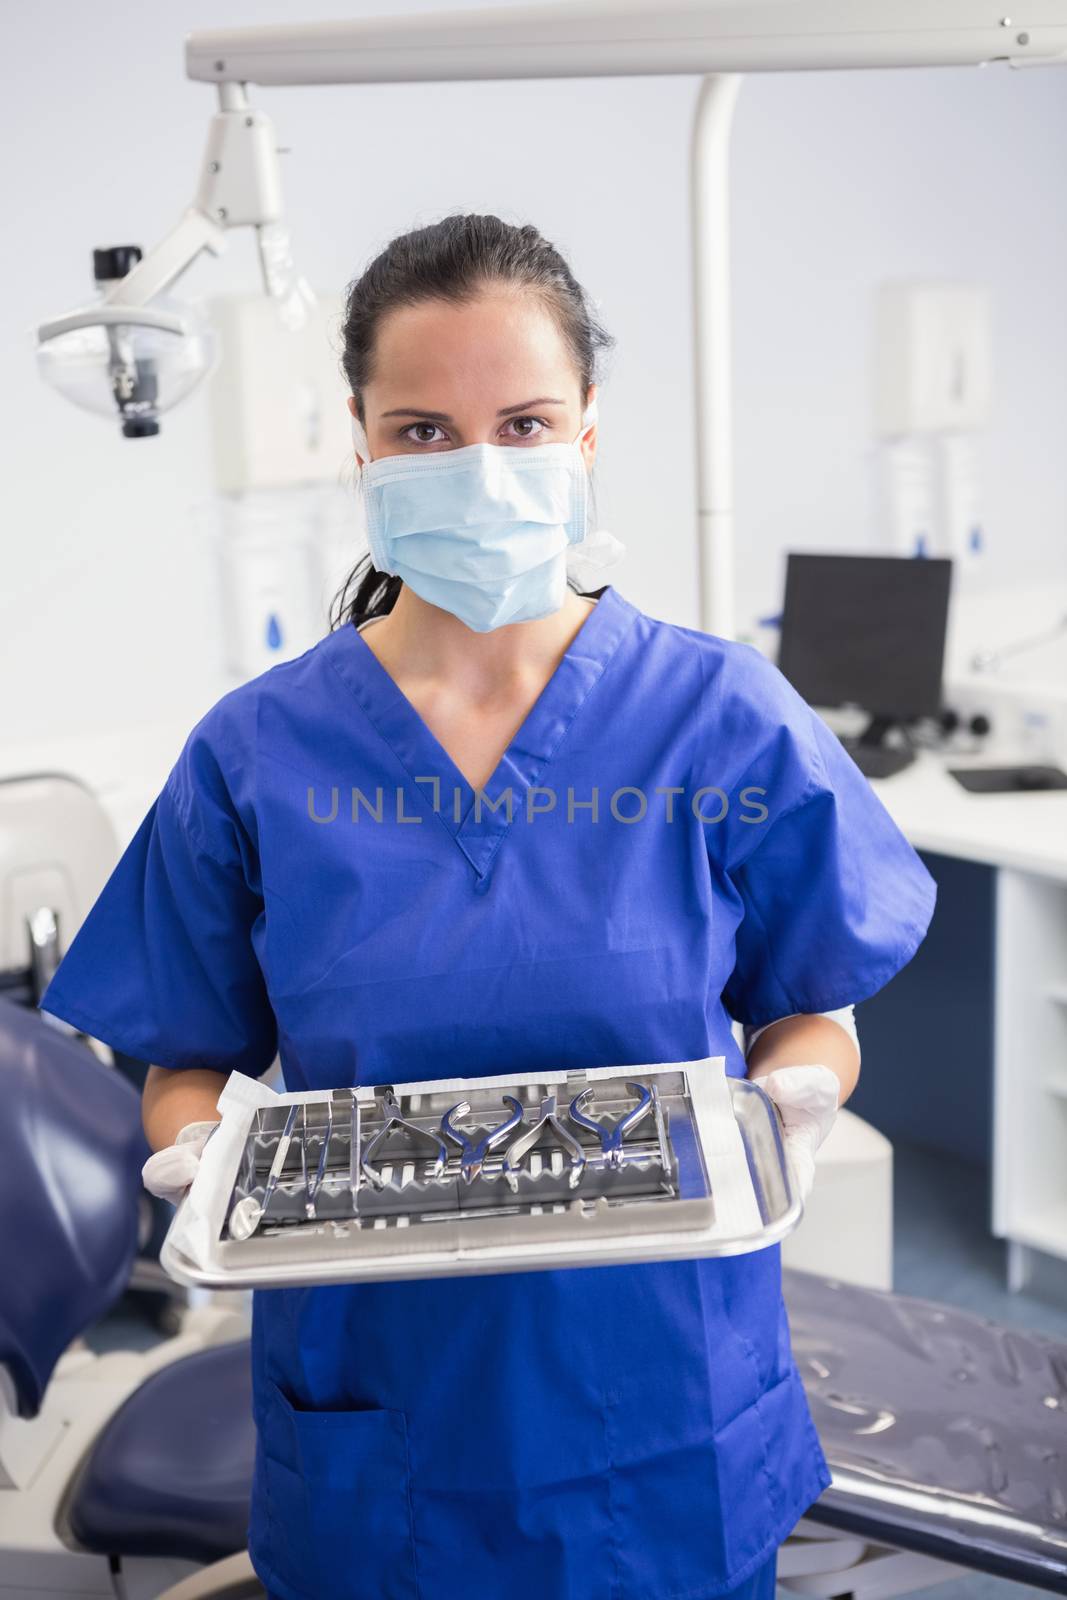 Portrait of a dentist with surgical mask and holding tray in dental clinic